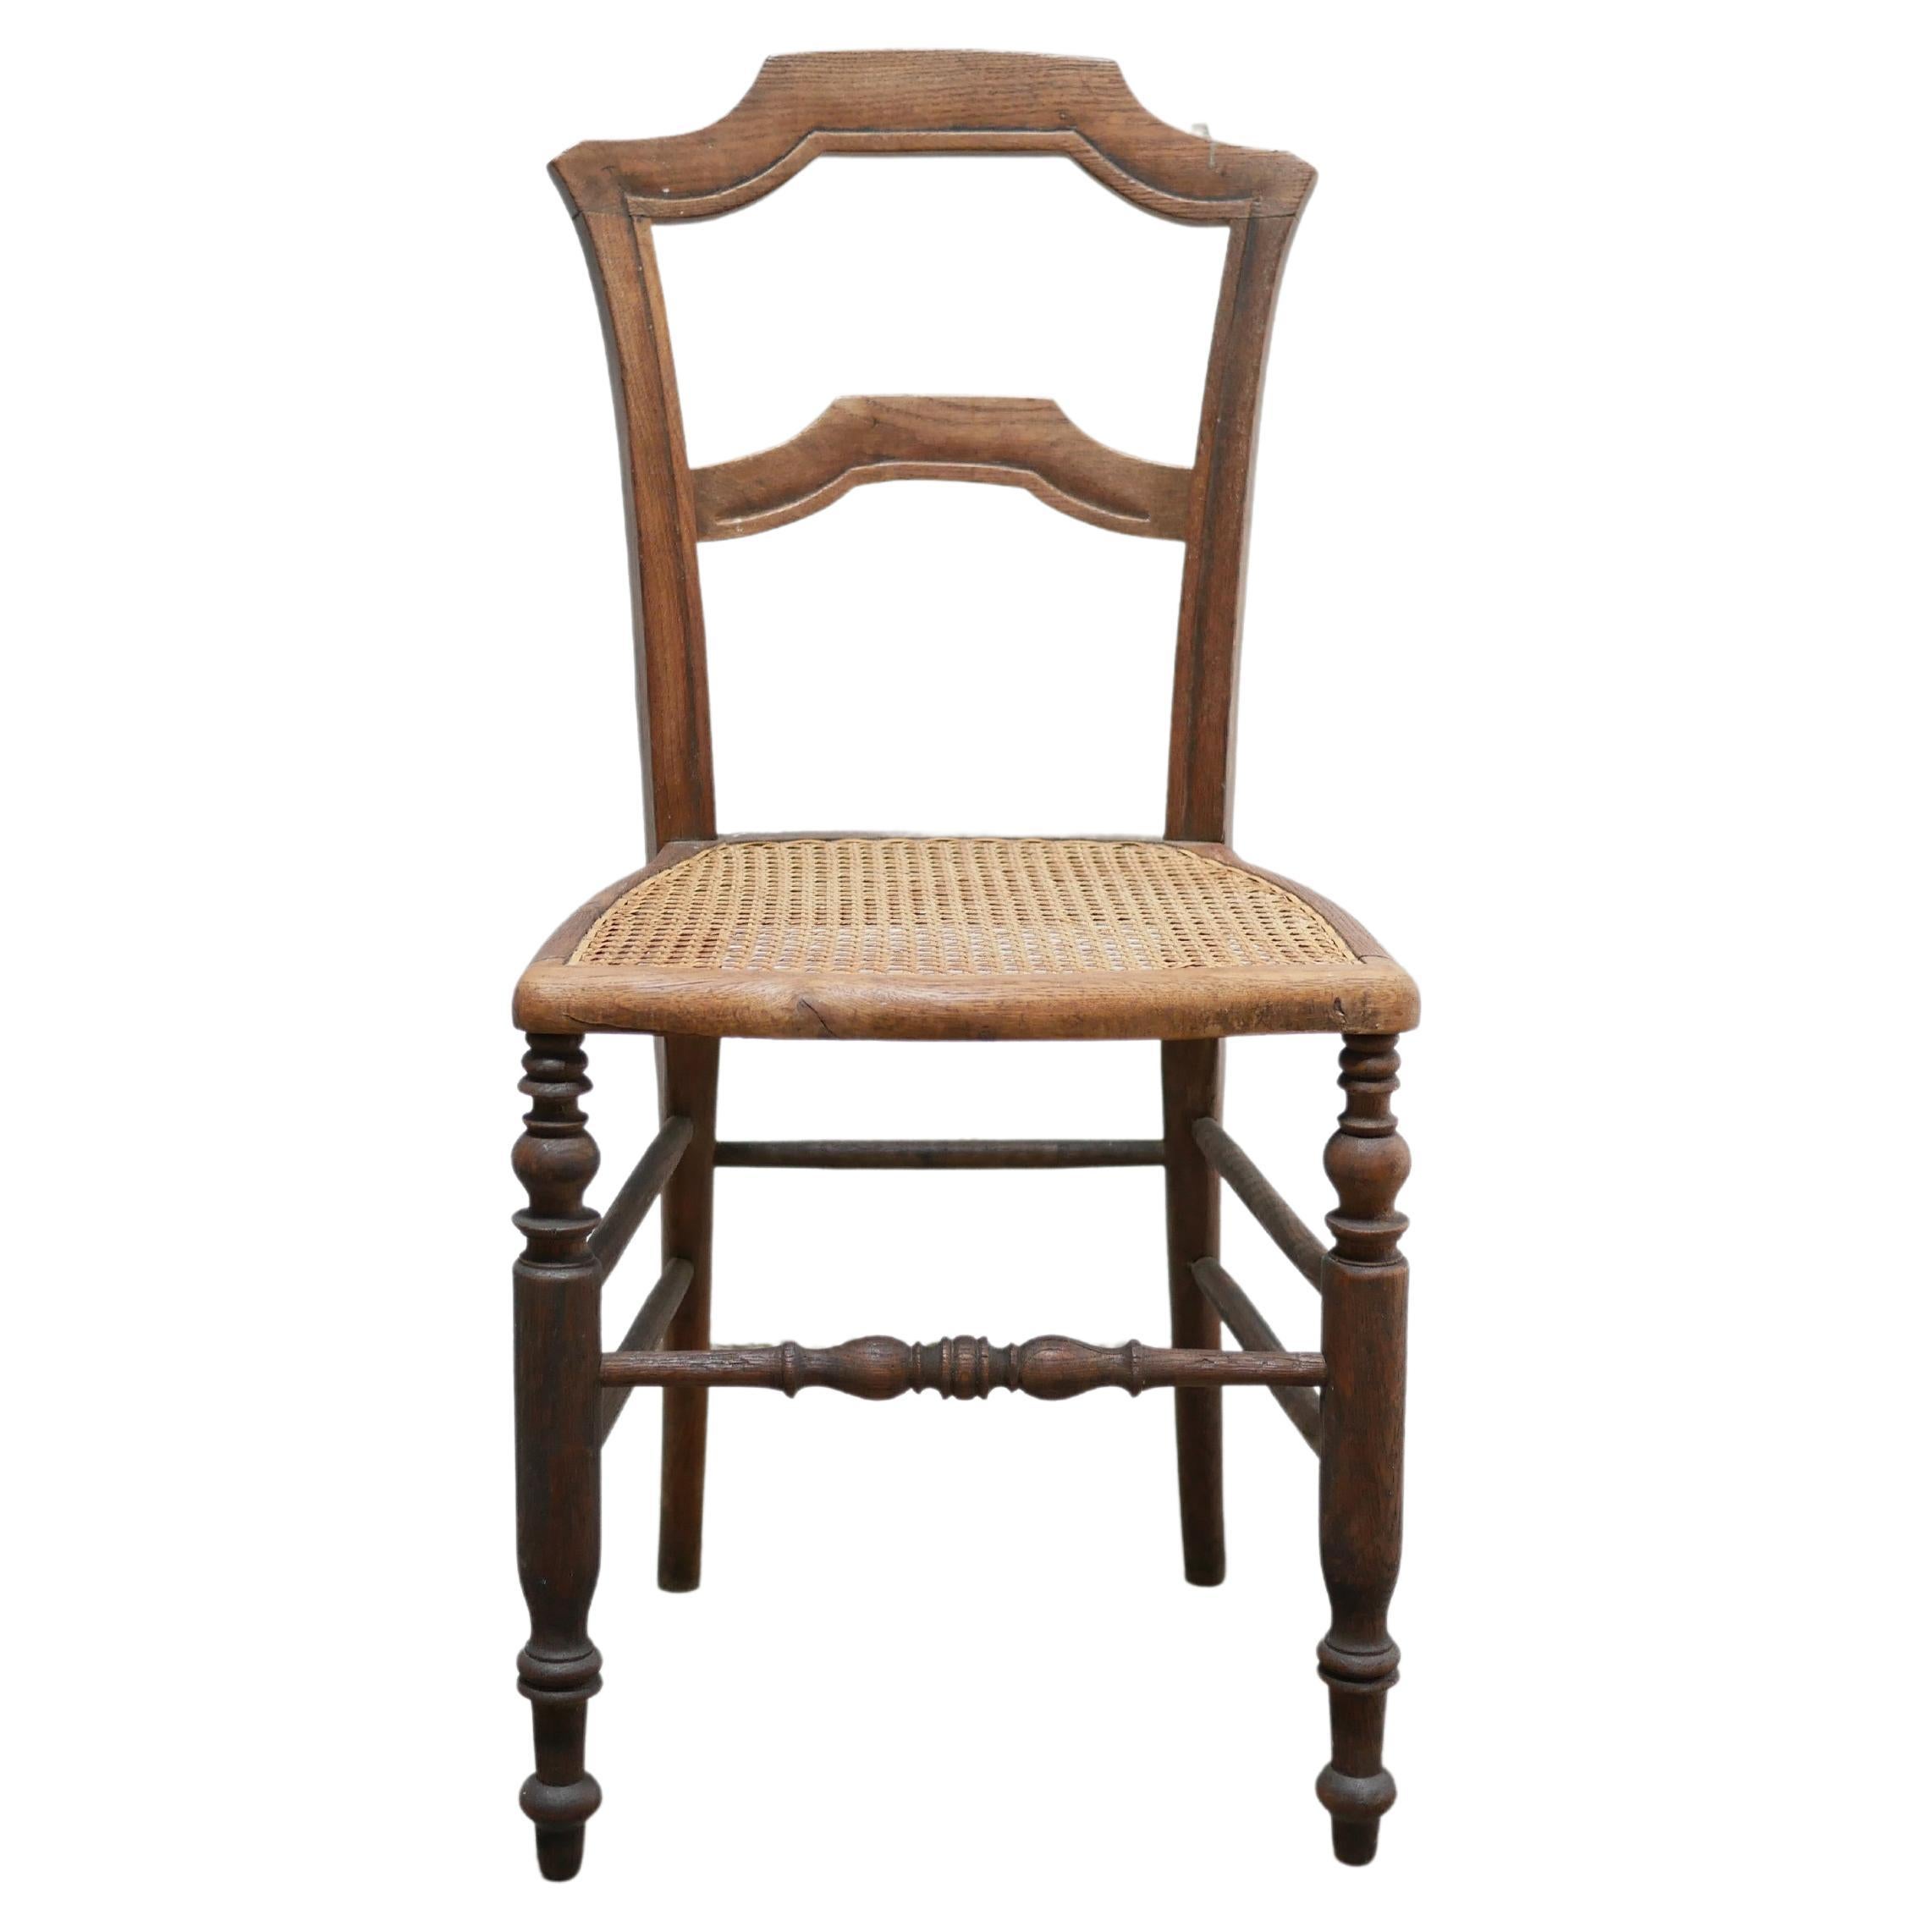 Old wooden cane chair For Sale